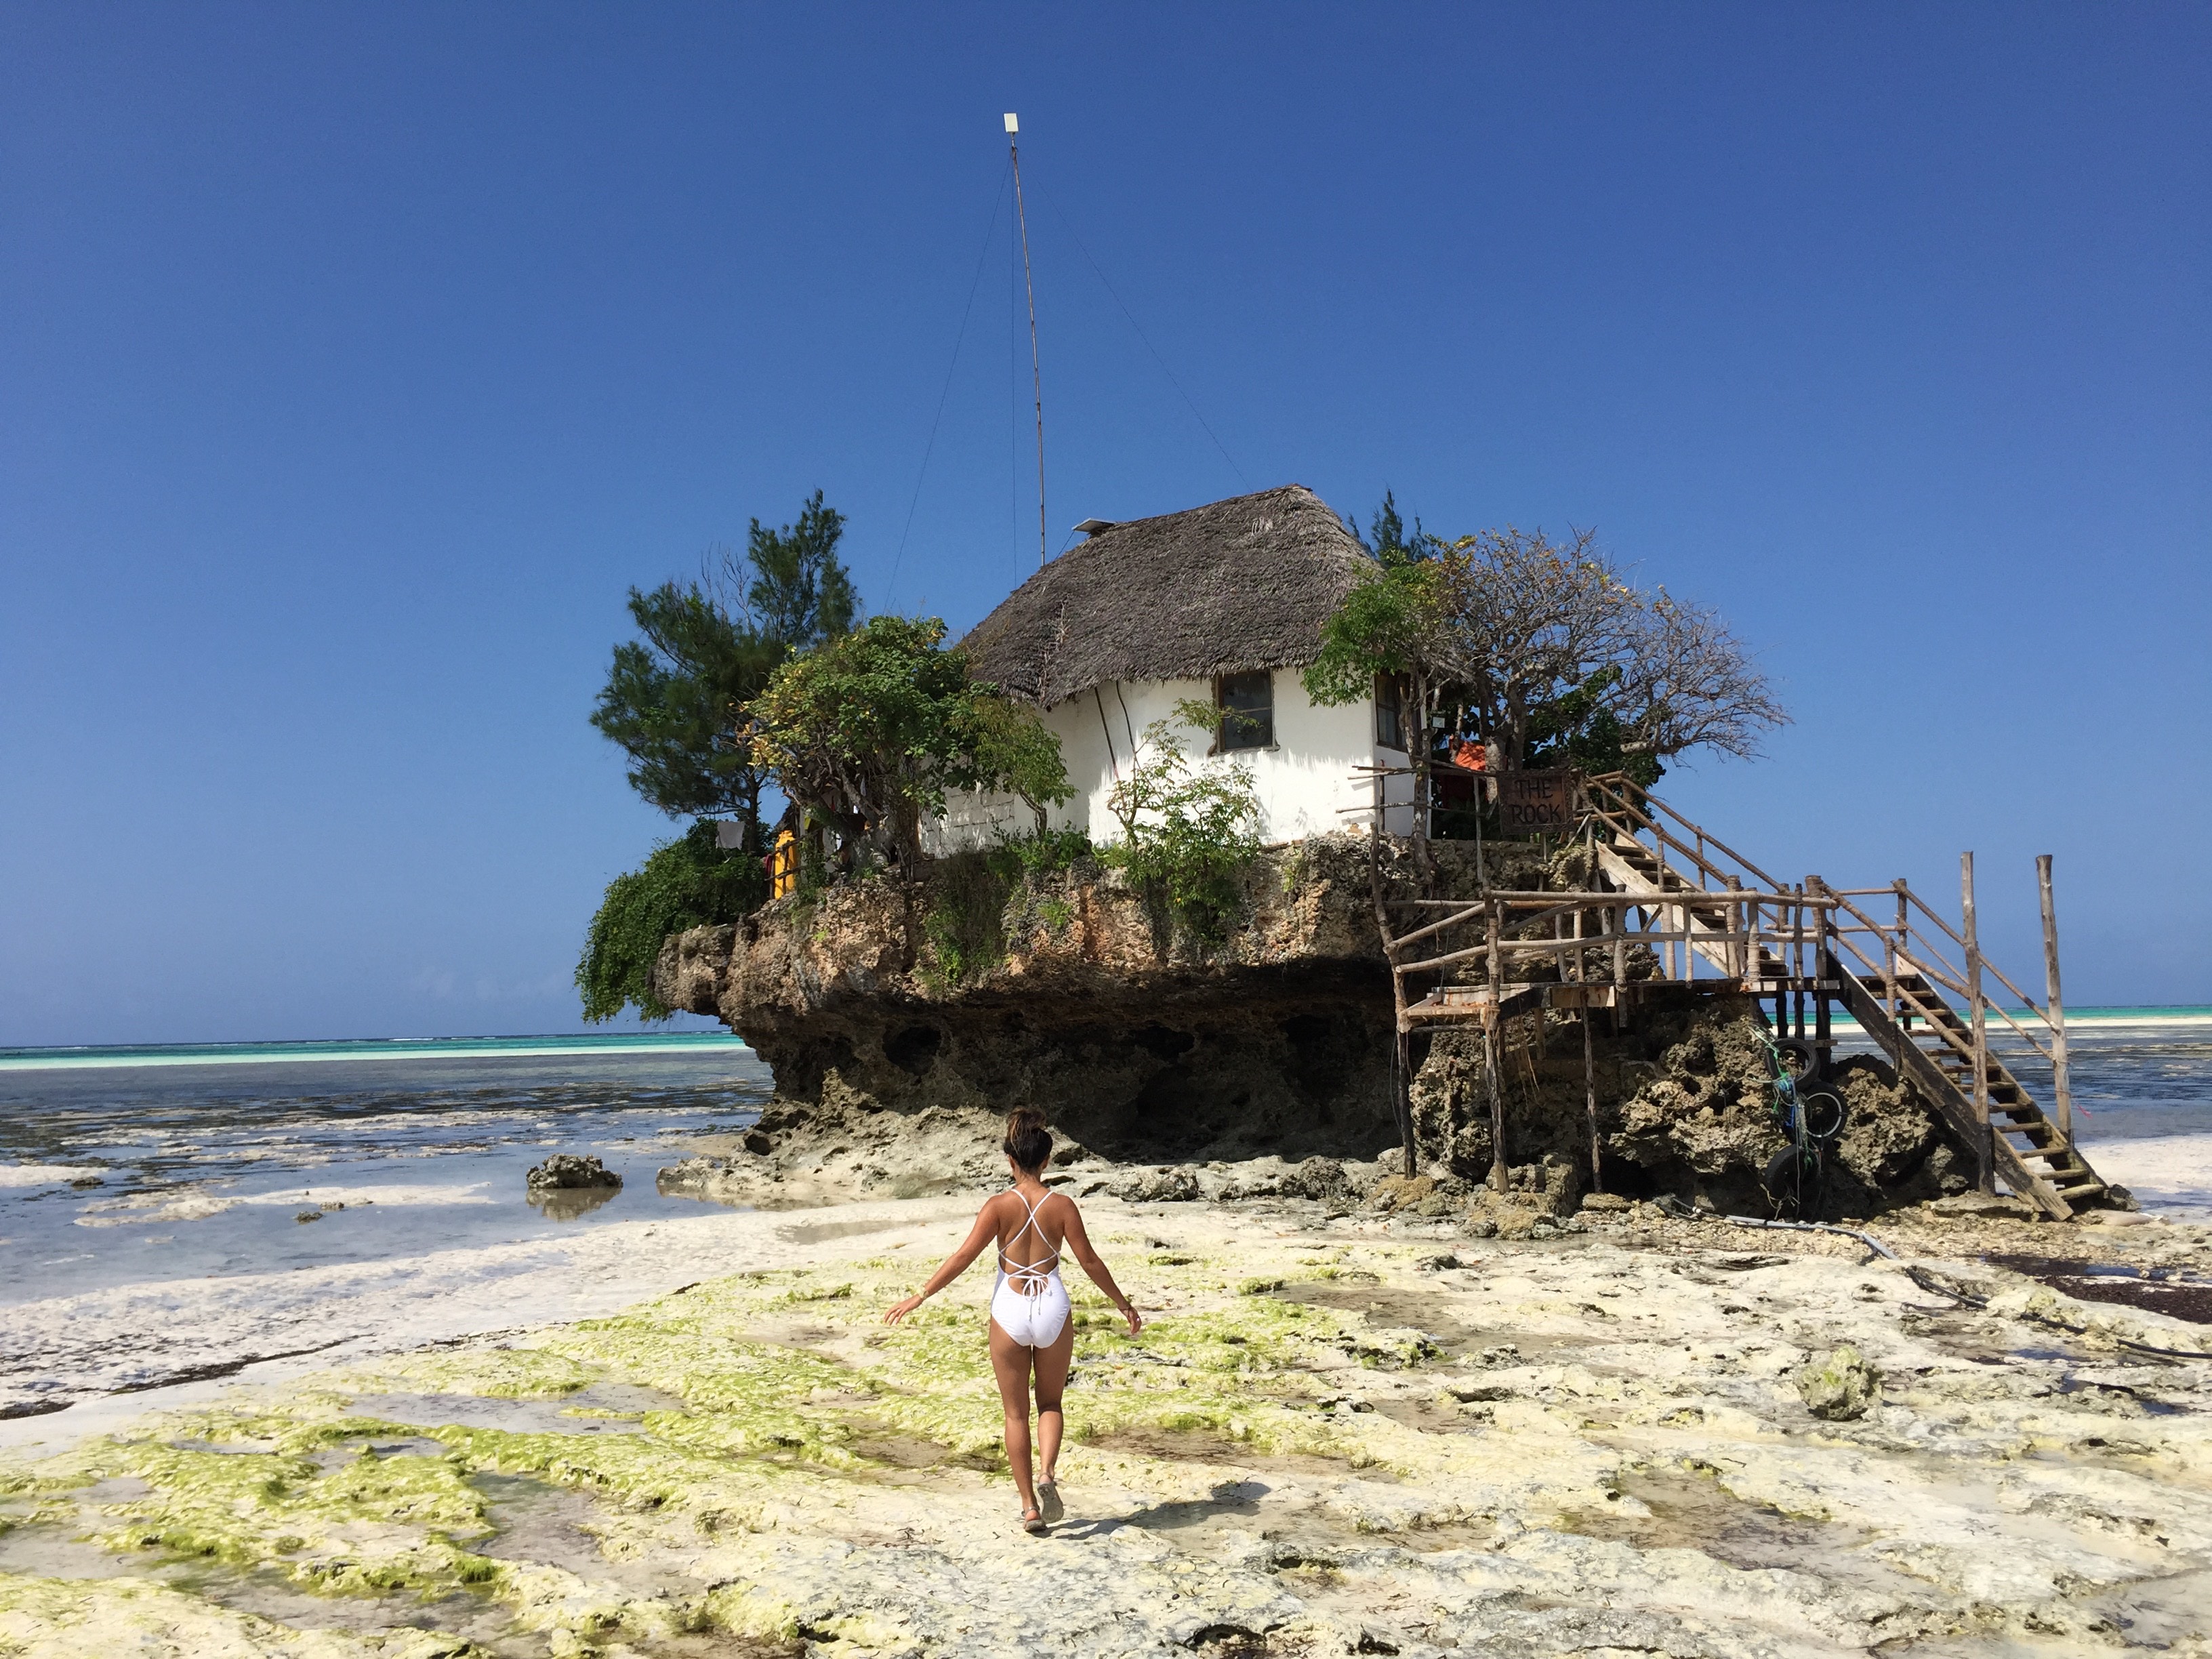 Lunch at The Rock, a restaurant in the Indian Ocean accessible by foot at low tide and boat at high tide. 